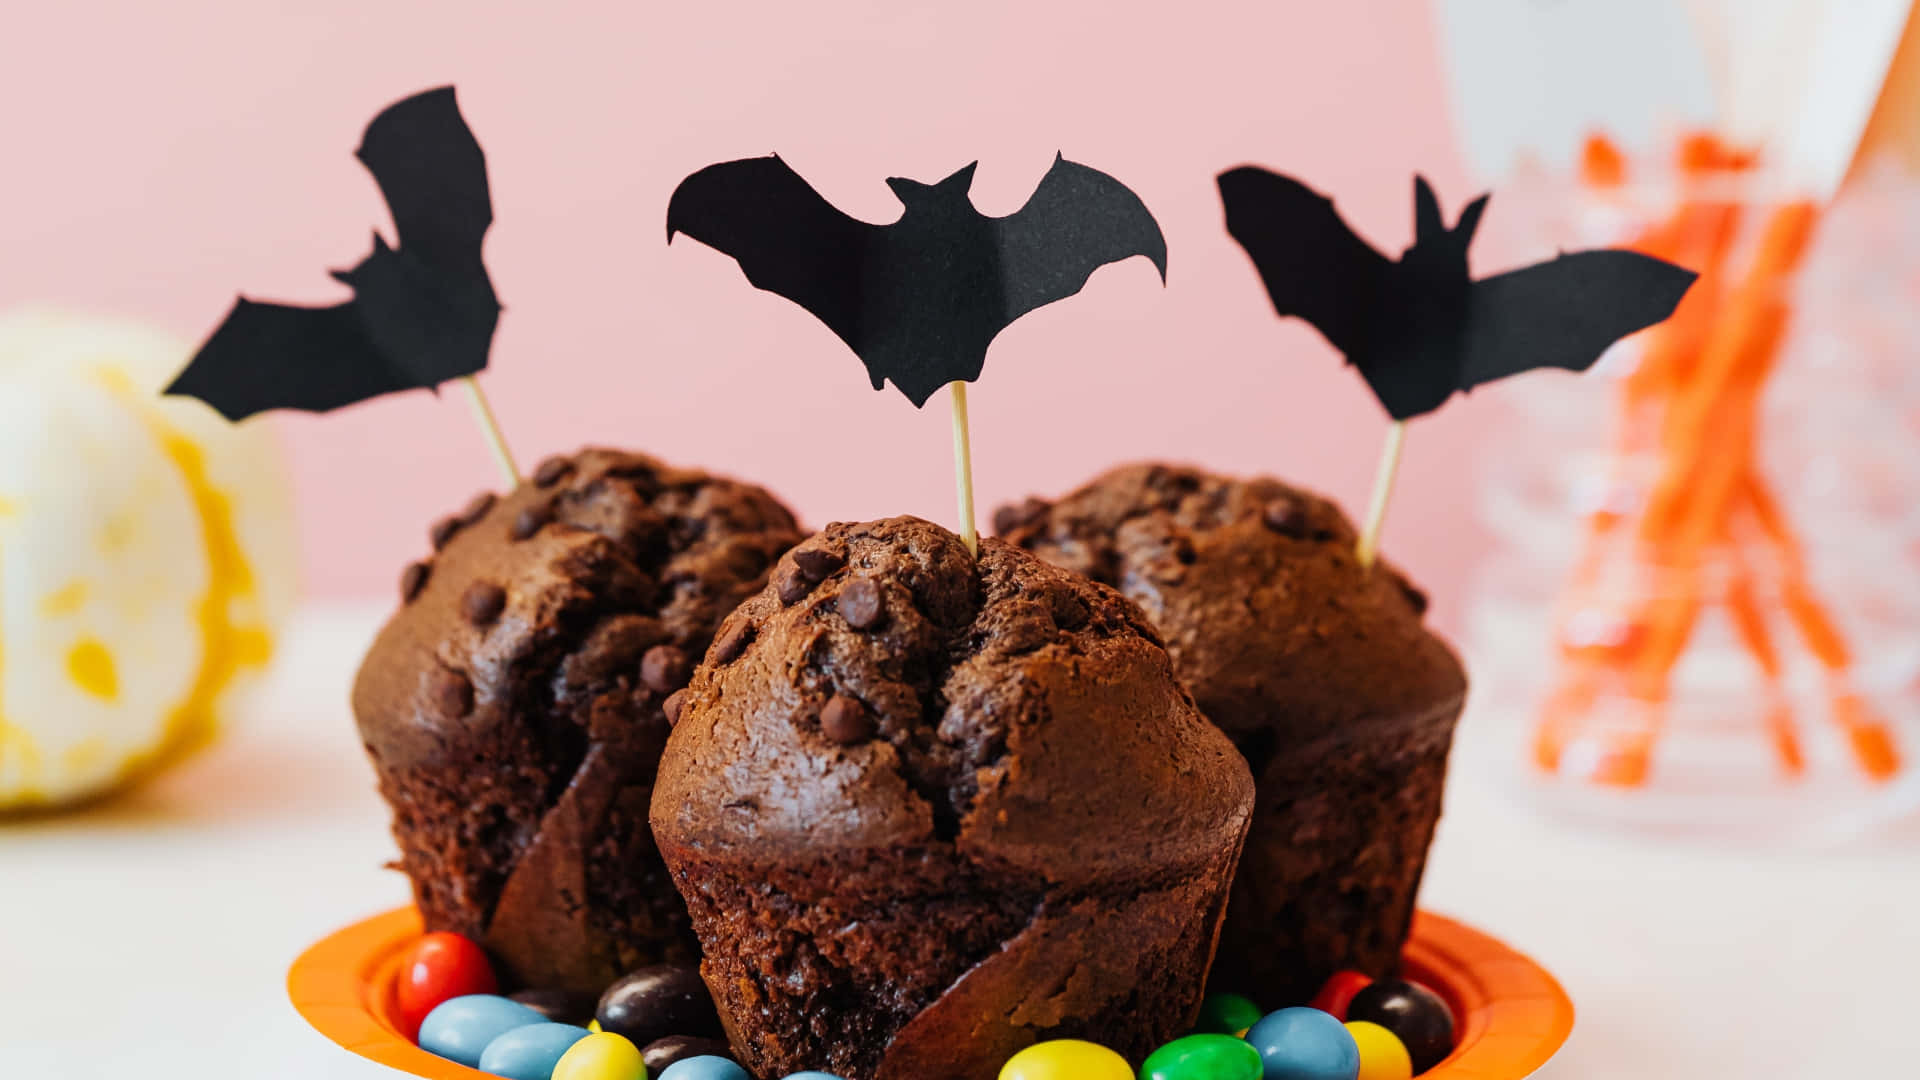 Trick or Treat! Delicious and spooky Halloween Cupcakes Wallpaper